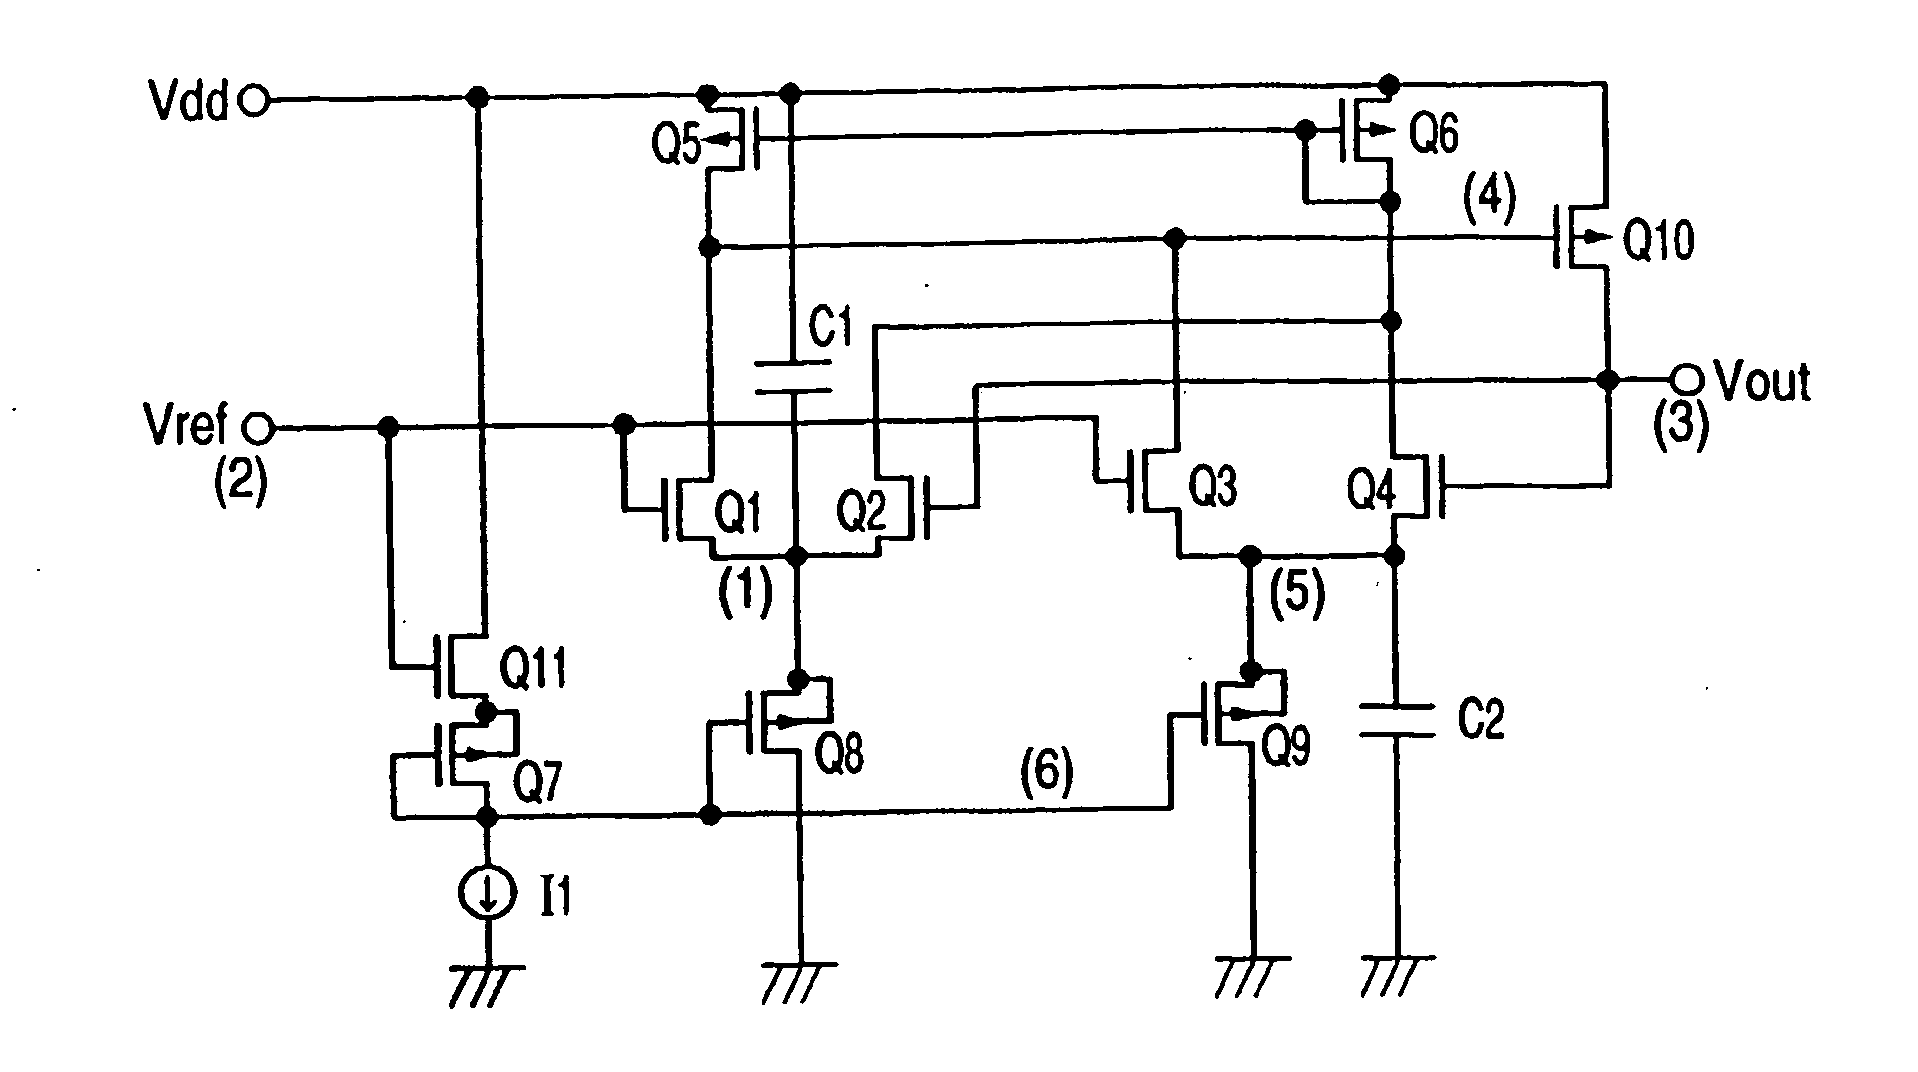 Step-down circuit with stabilized voltage